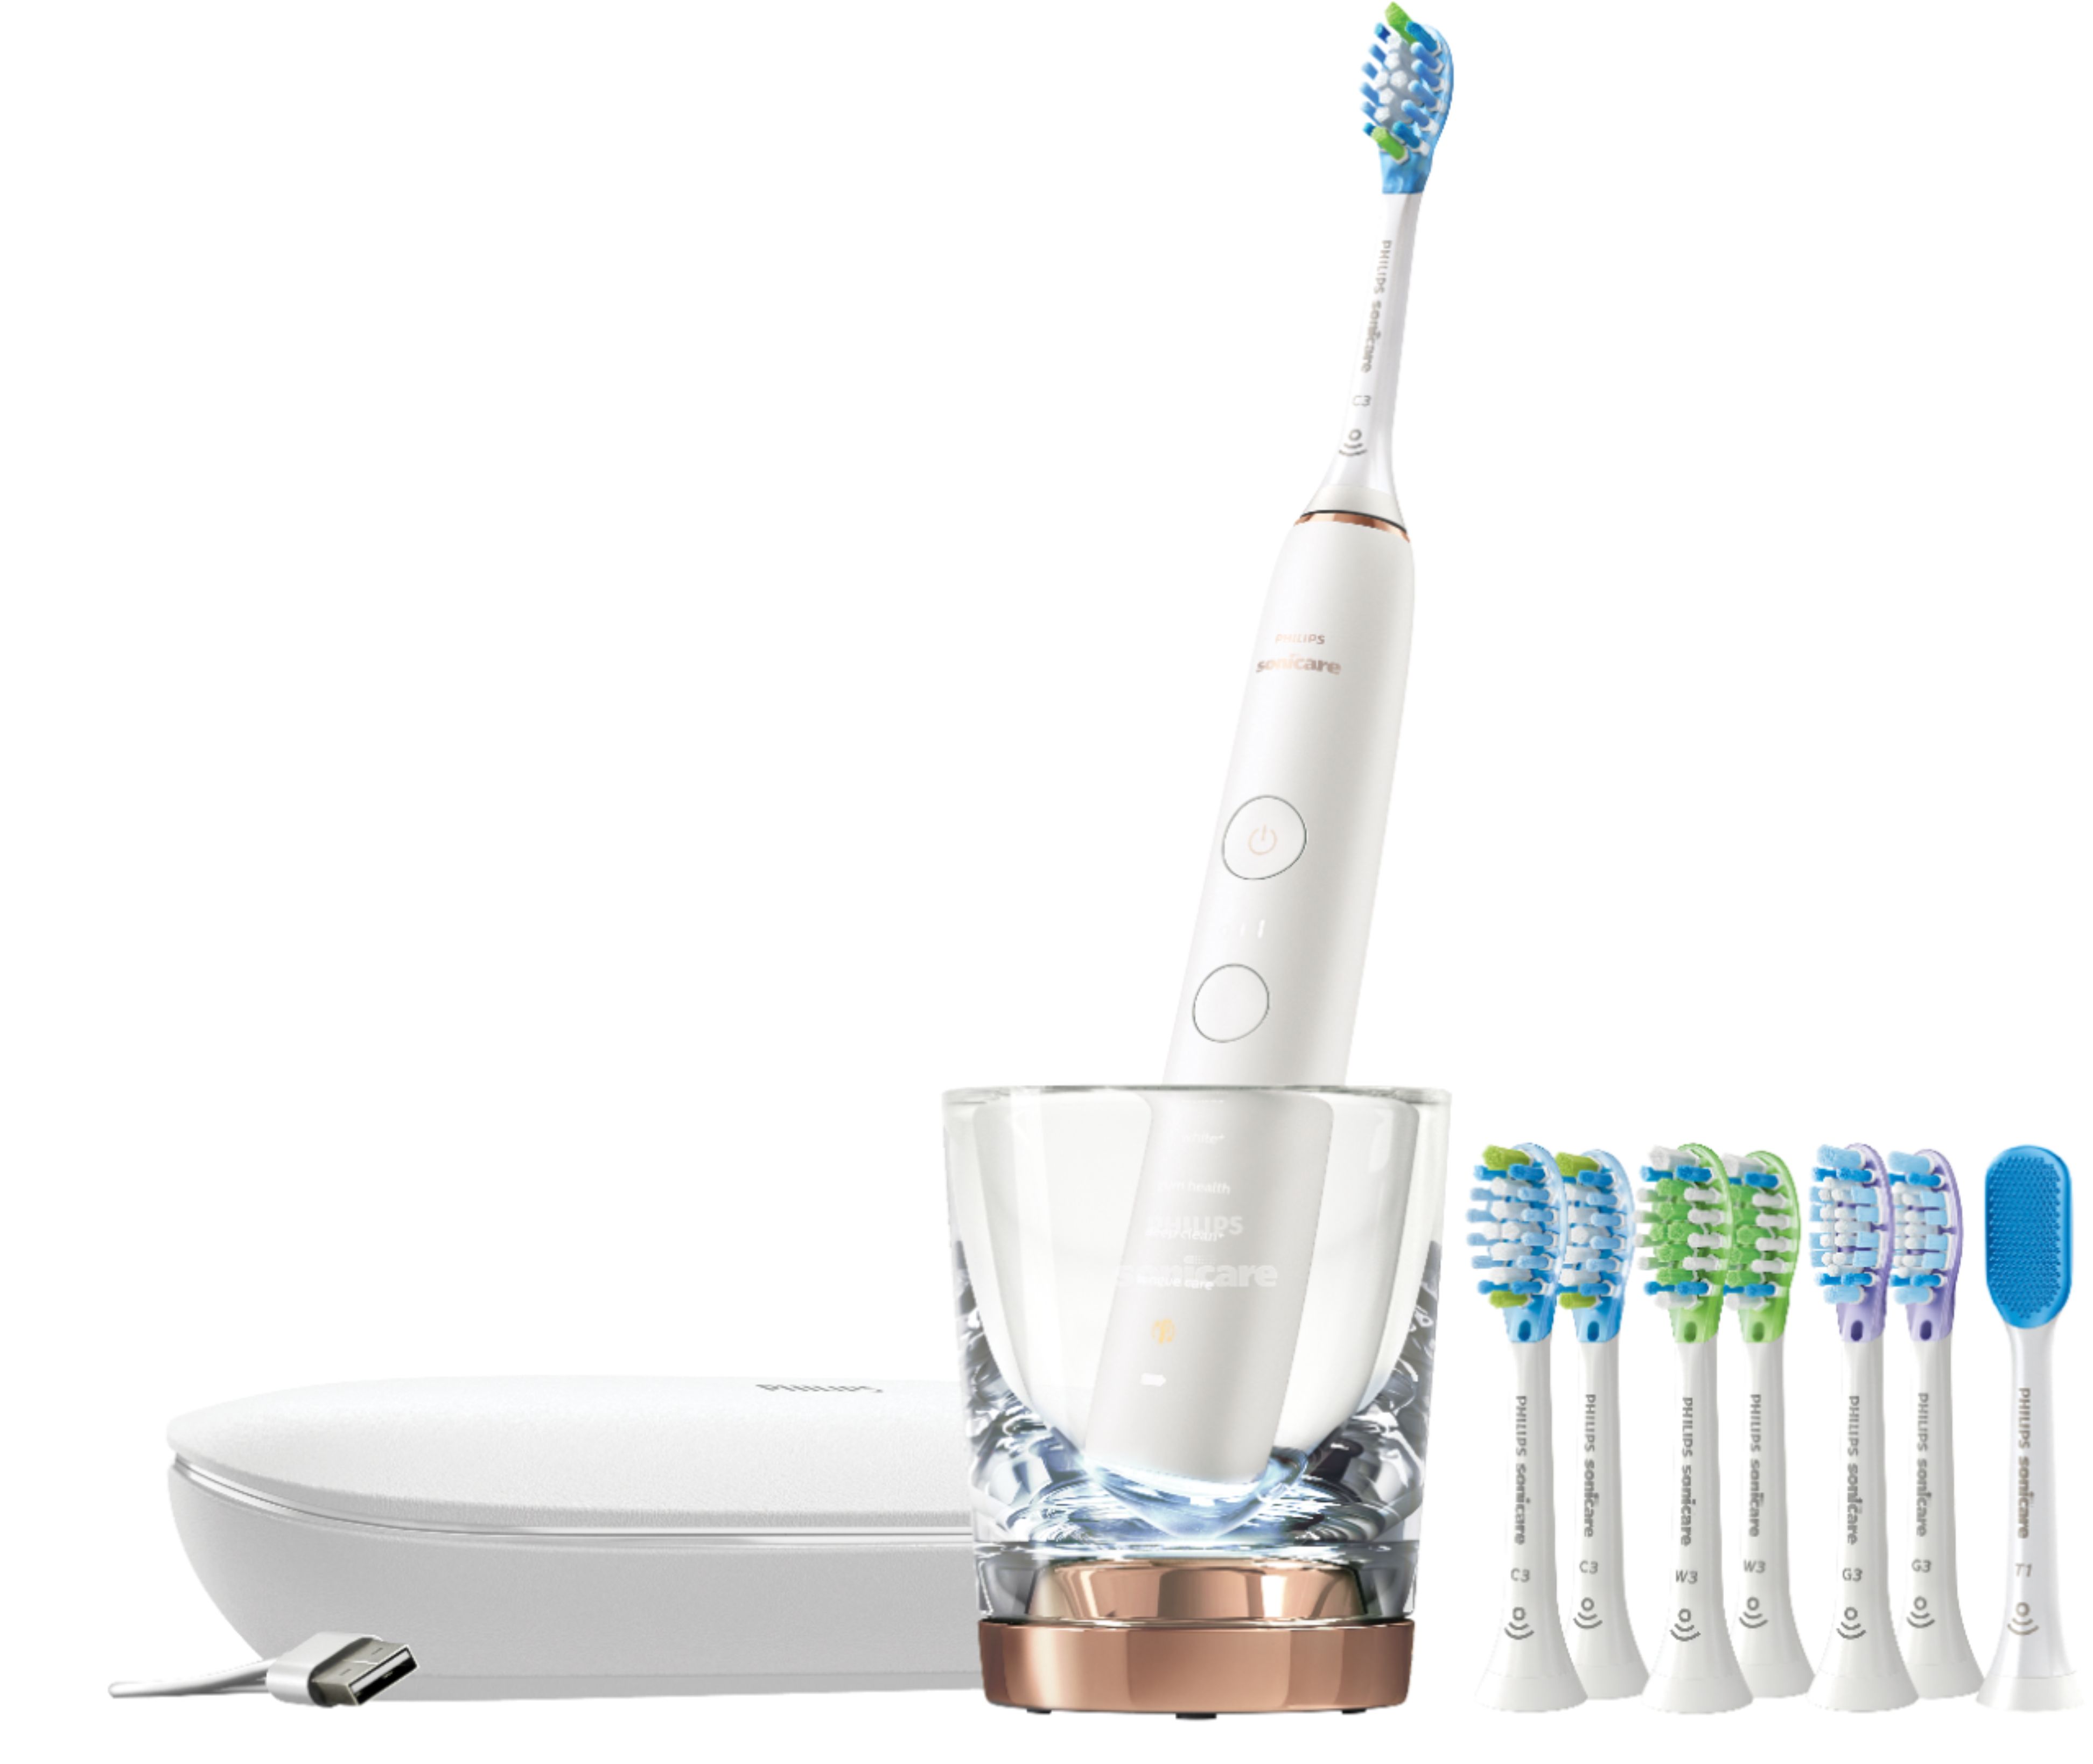 Philips Sonicare DiamondClean Smart Electric Toothbrush